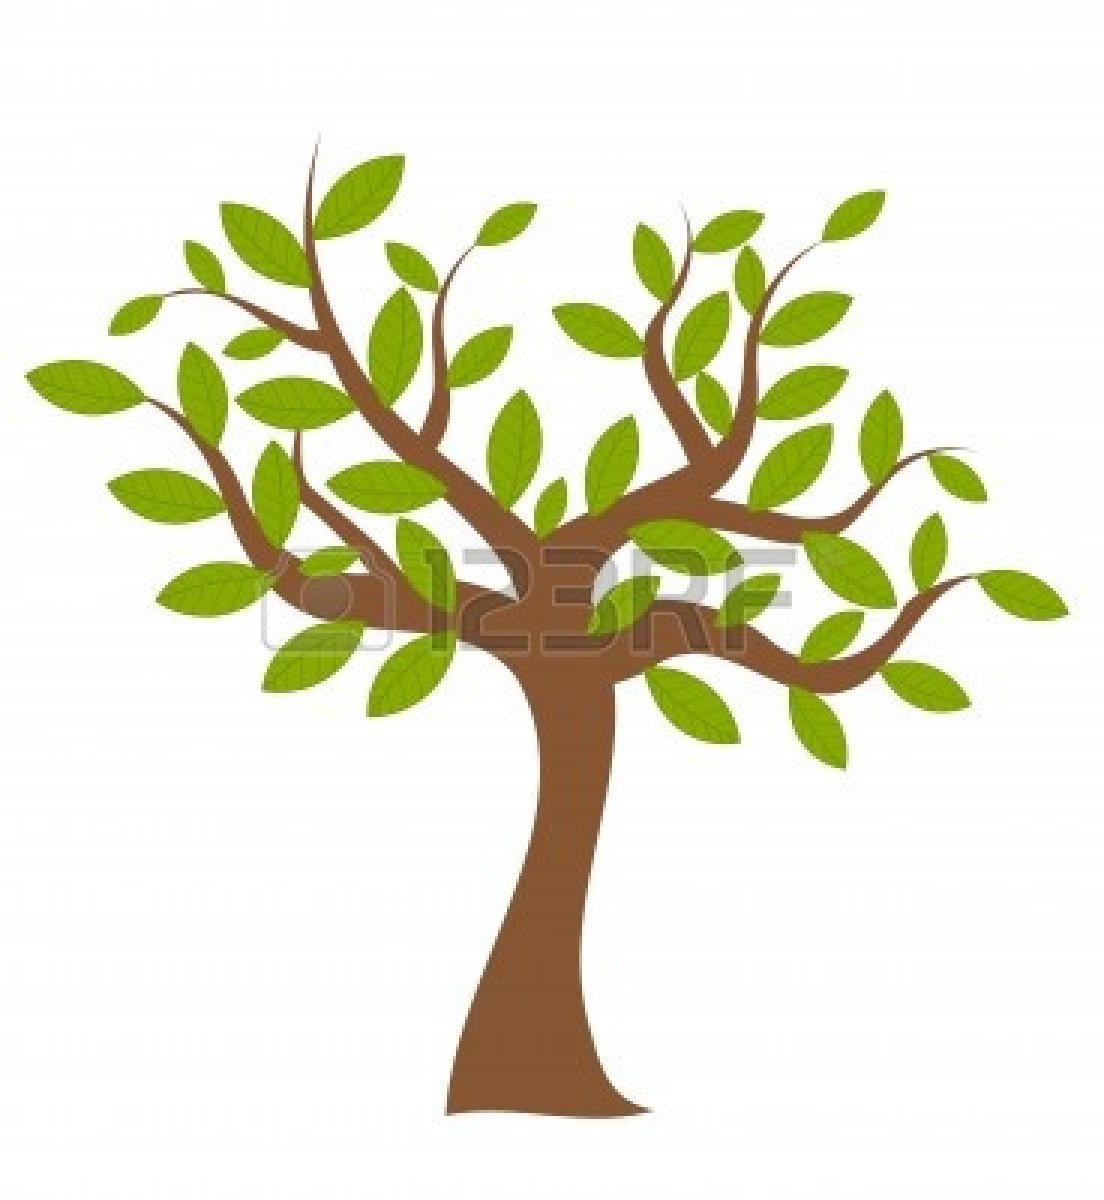 Spring tree clipart free clipart images